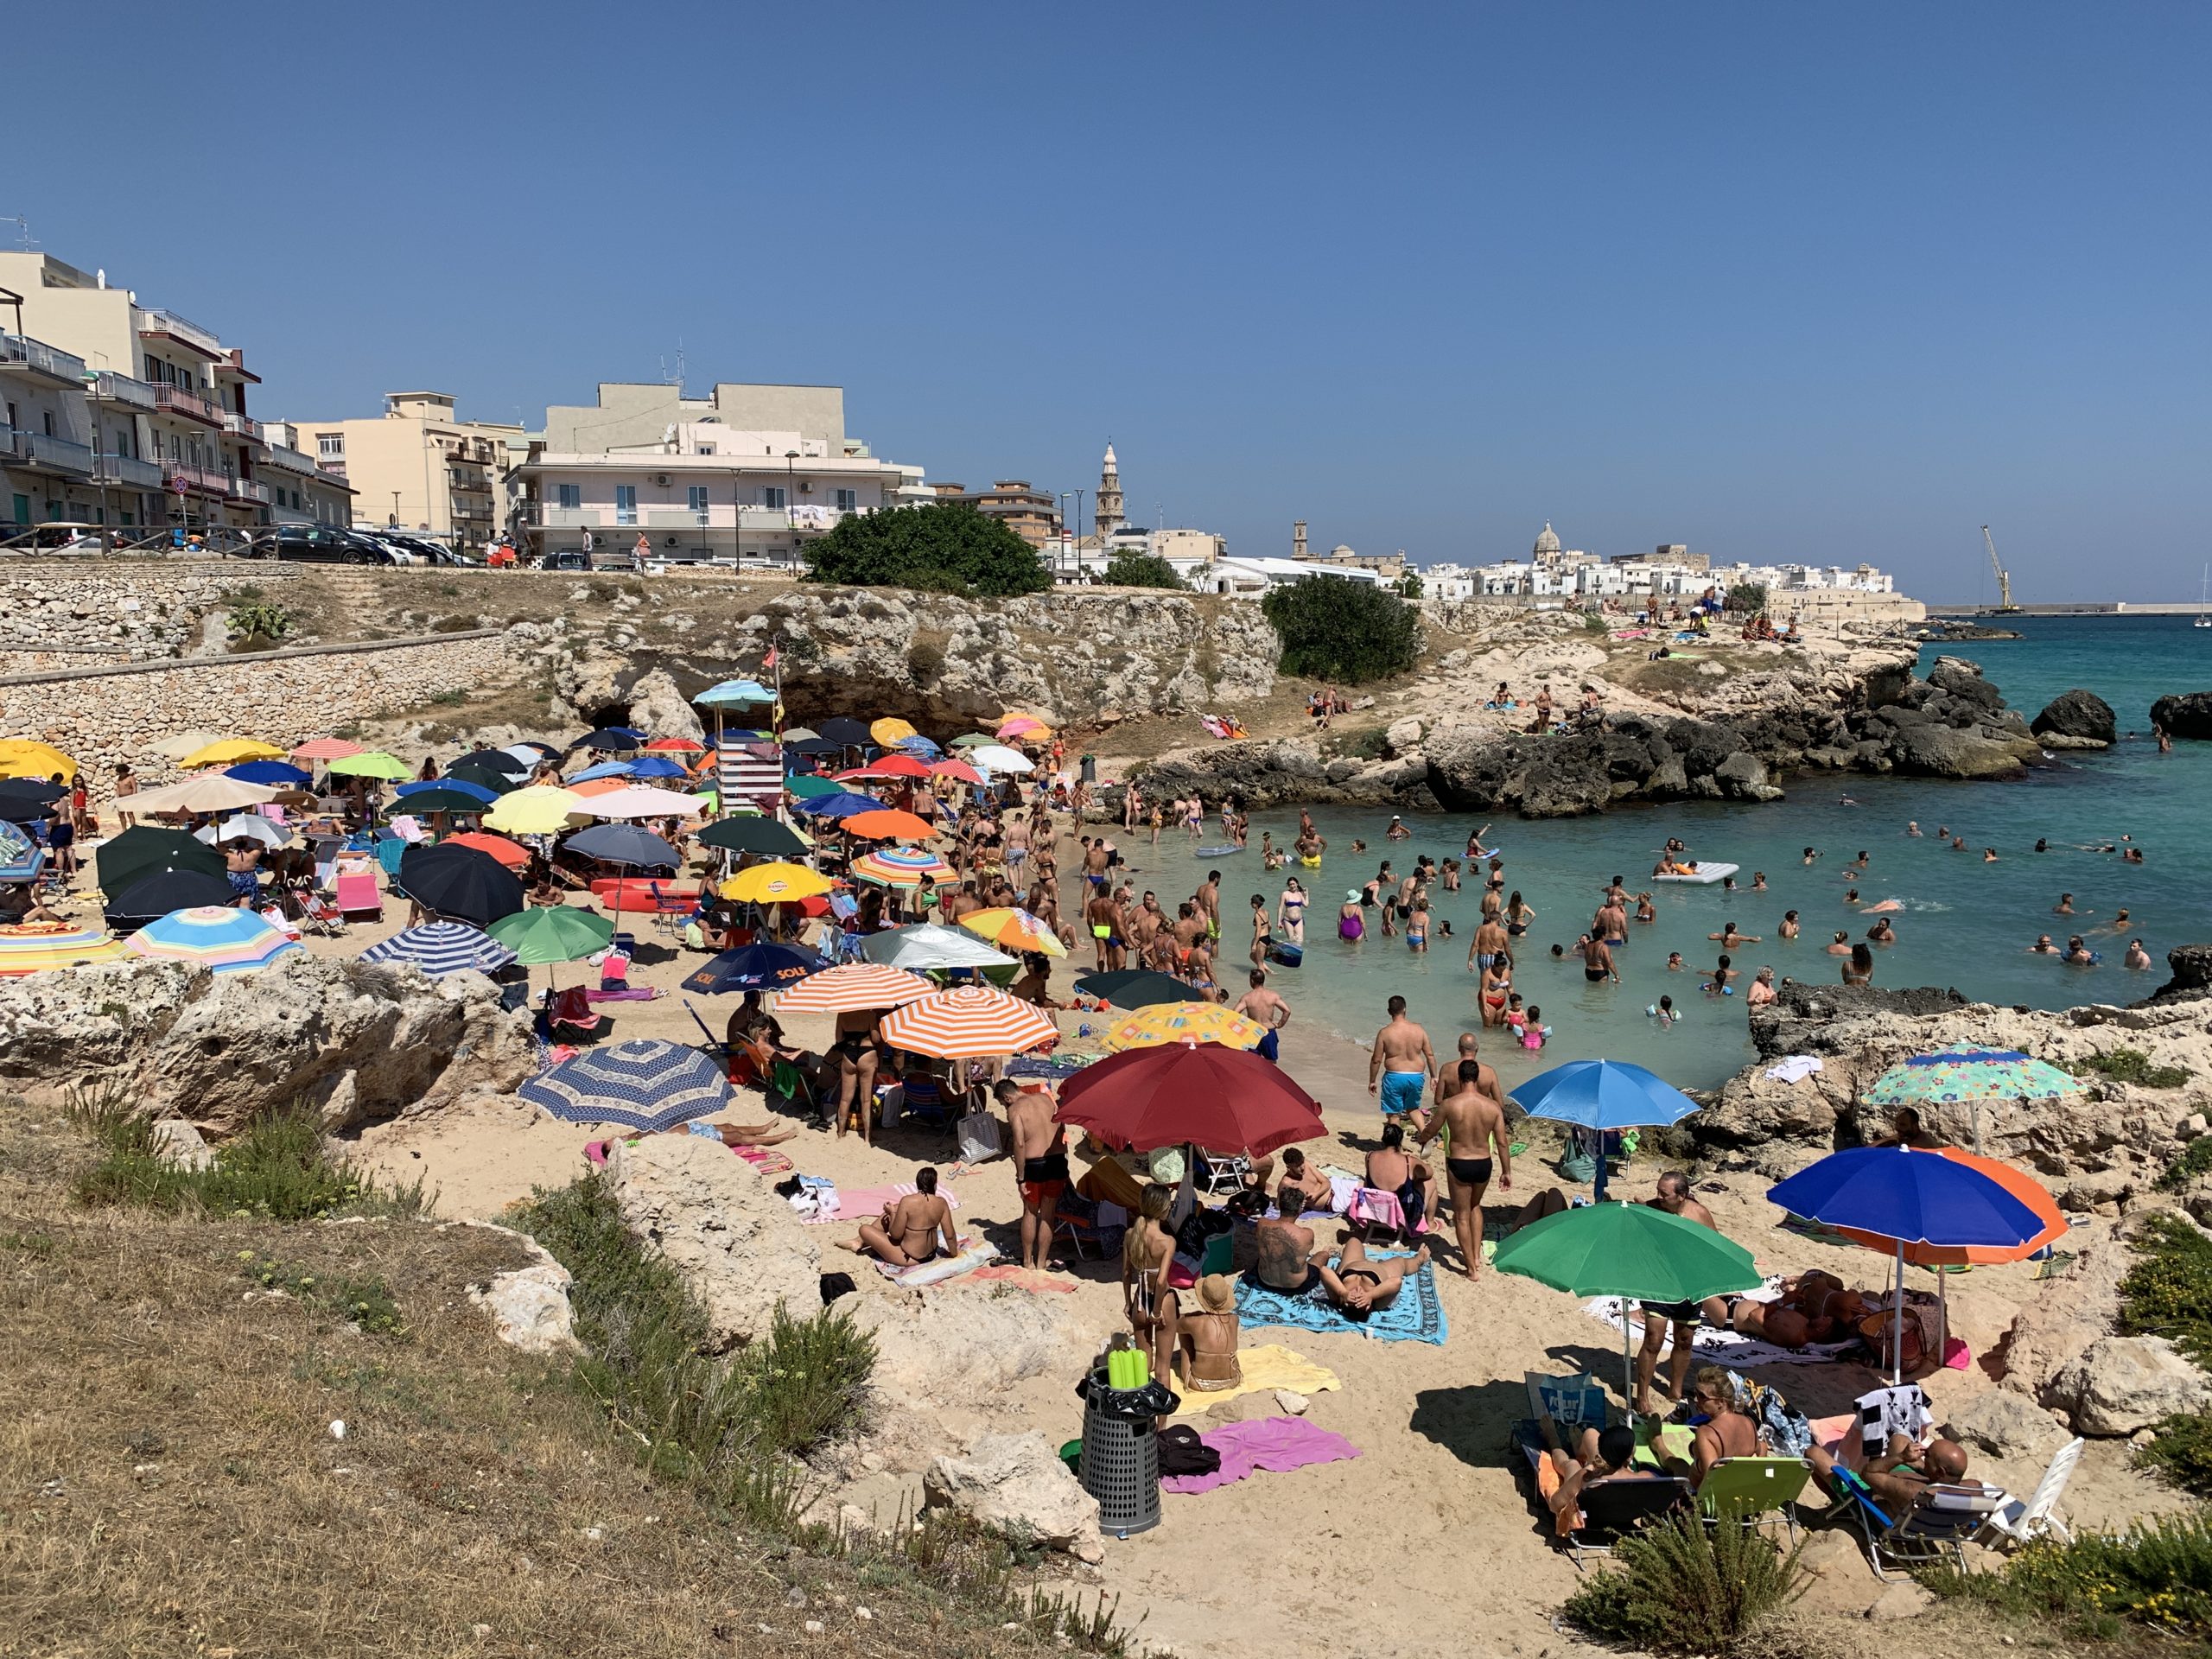 Porto Rosso beach in Monopoli, Puglia, is a bust town beach popular with locals.